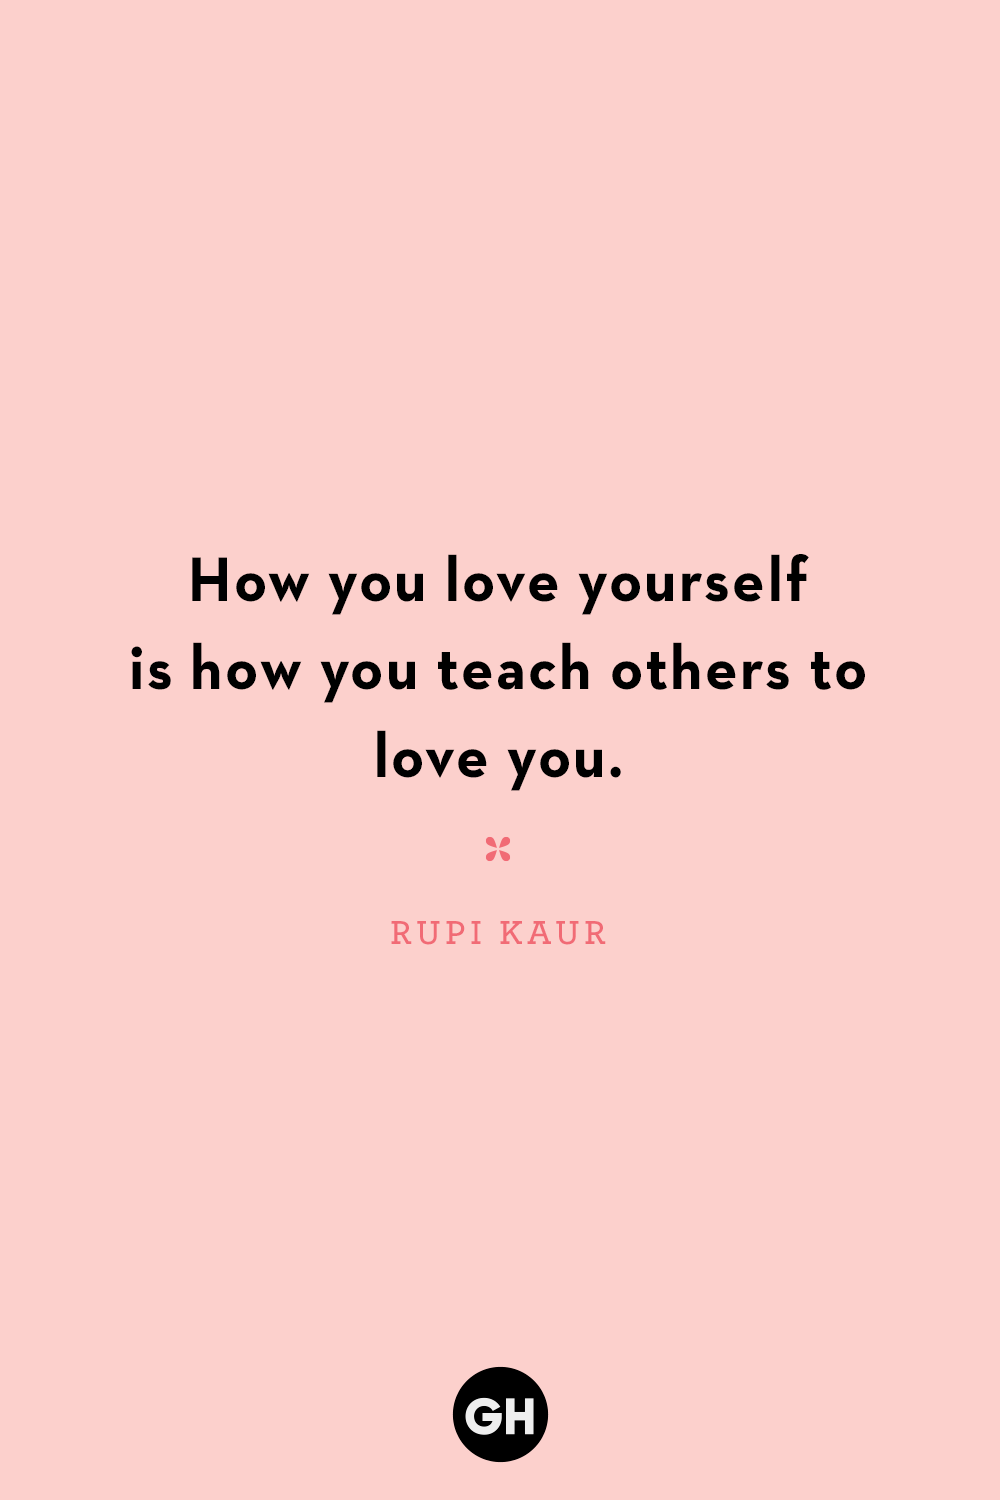 learn to love myself quotes